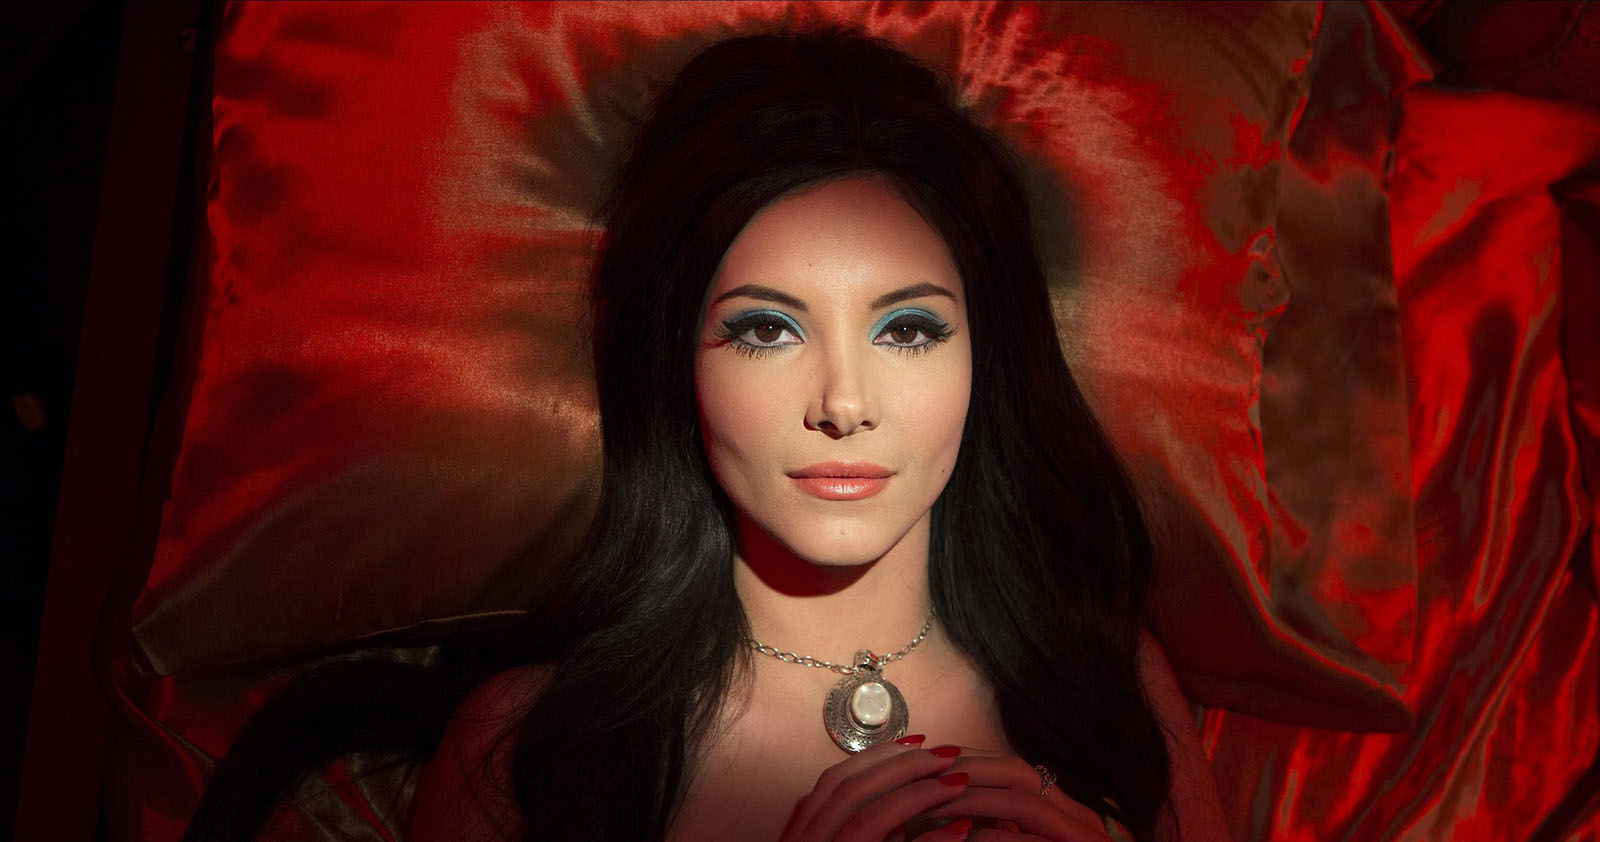 The Love Witch (2016) movie review